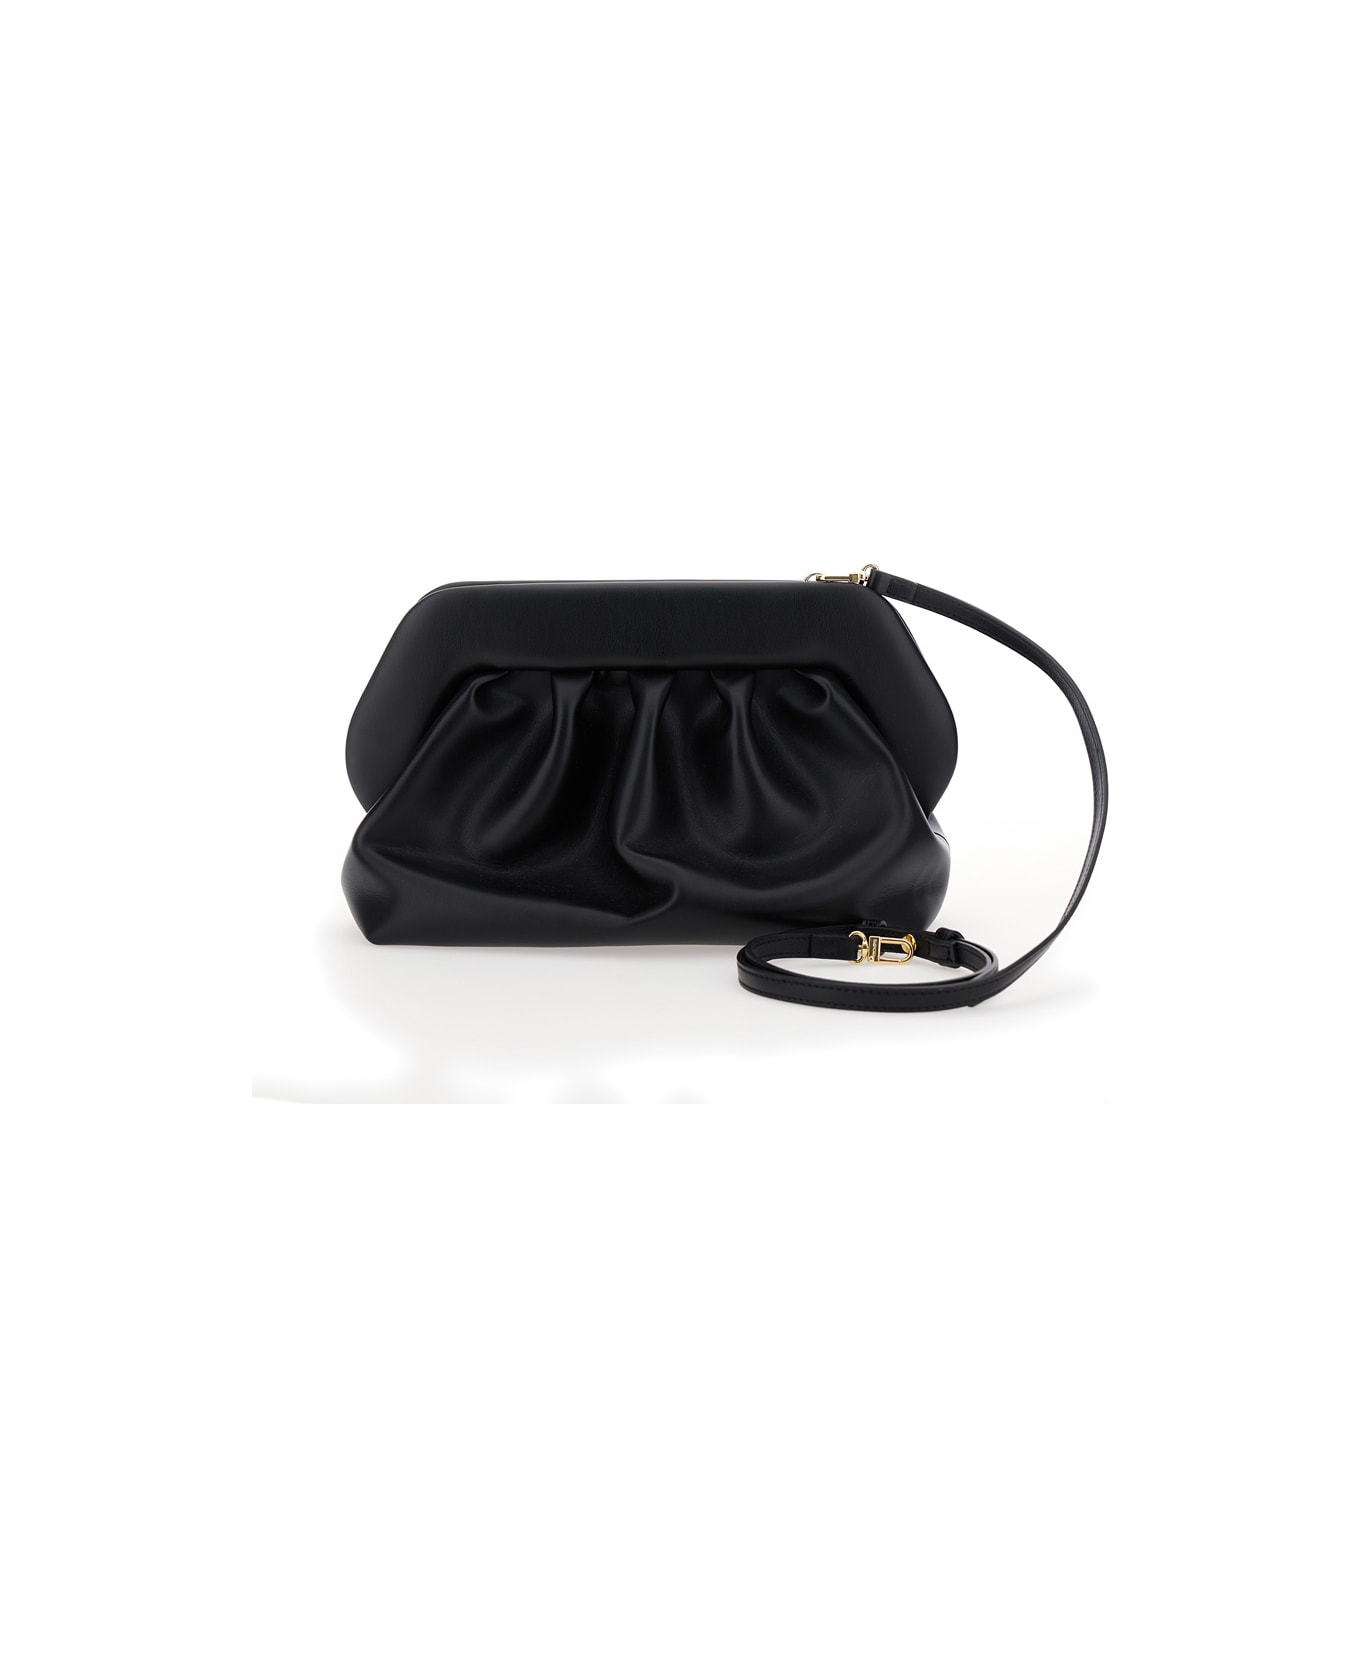 THEMOIRè Black Clutch Bag With Magnetic Closure In Eco Leather Woman - Black